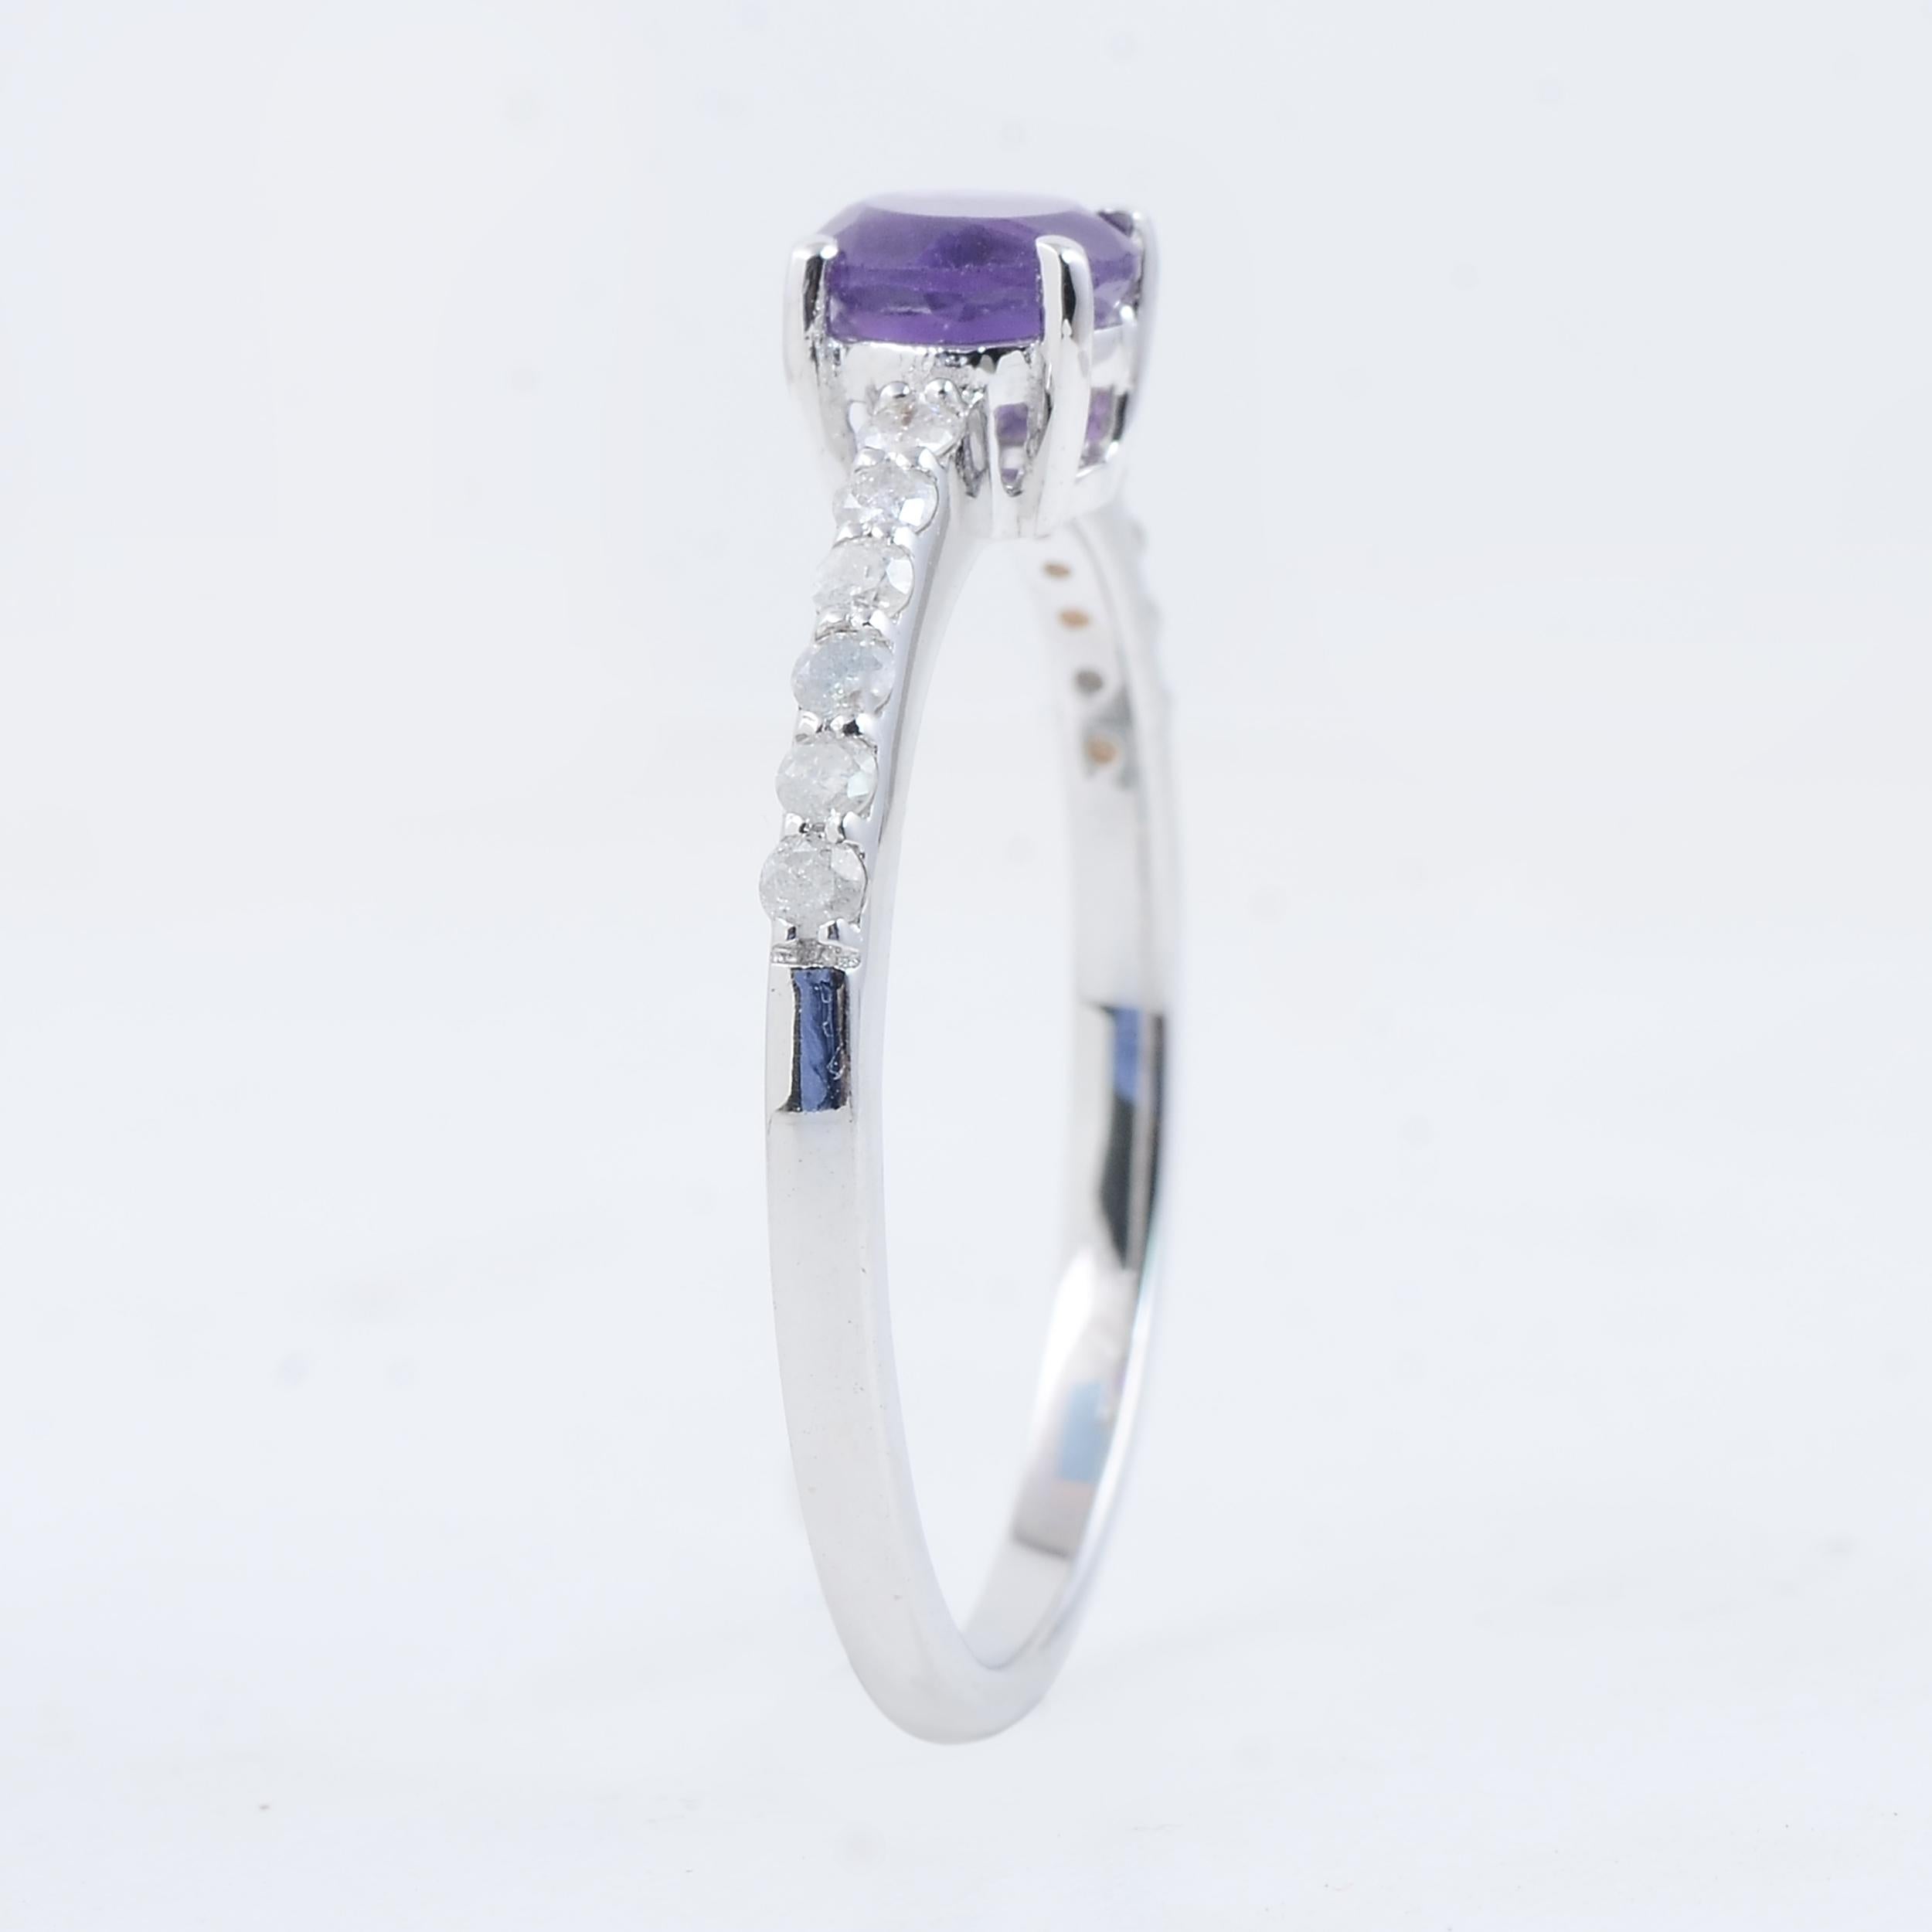 Women's Luxurious 14K Amethyst & Diamond Cocktail Ring, Size 6.75 - Statement Jewelry For Sale